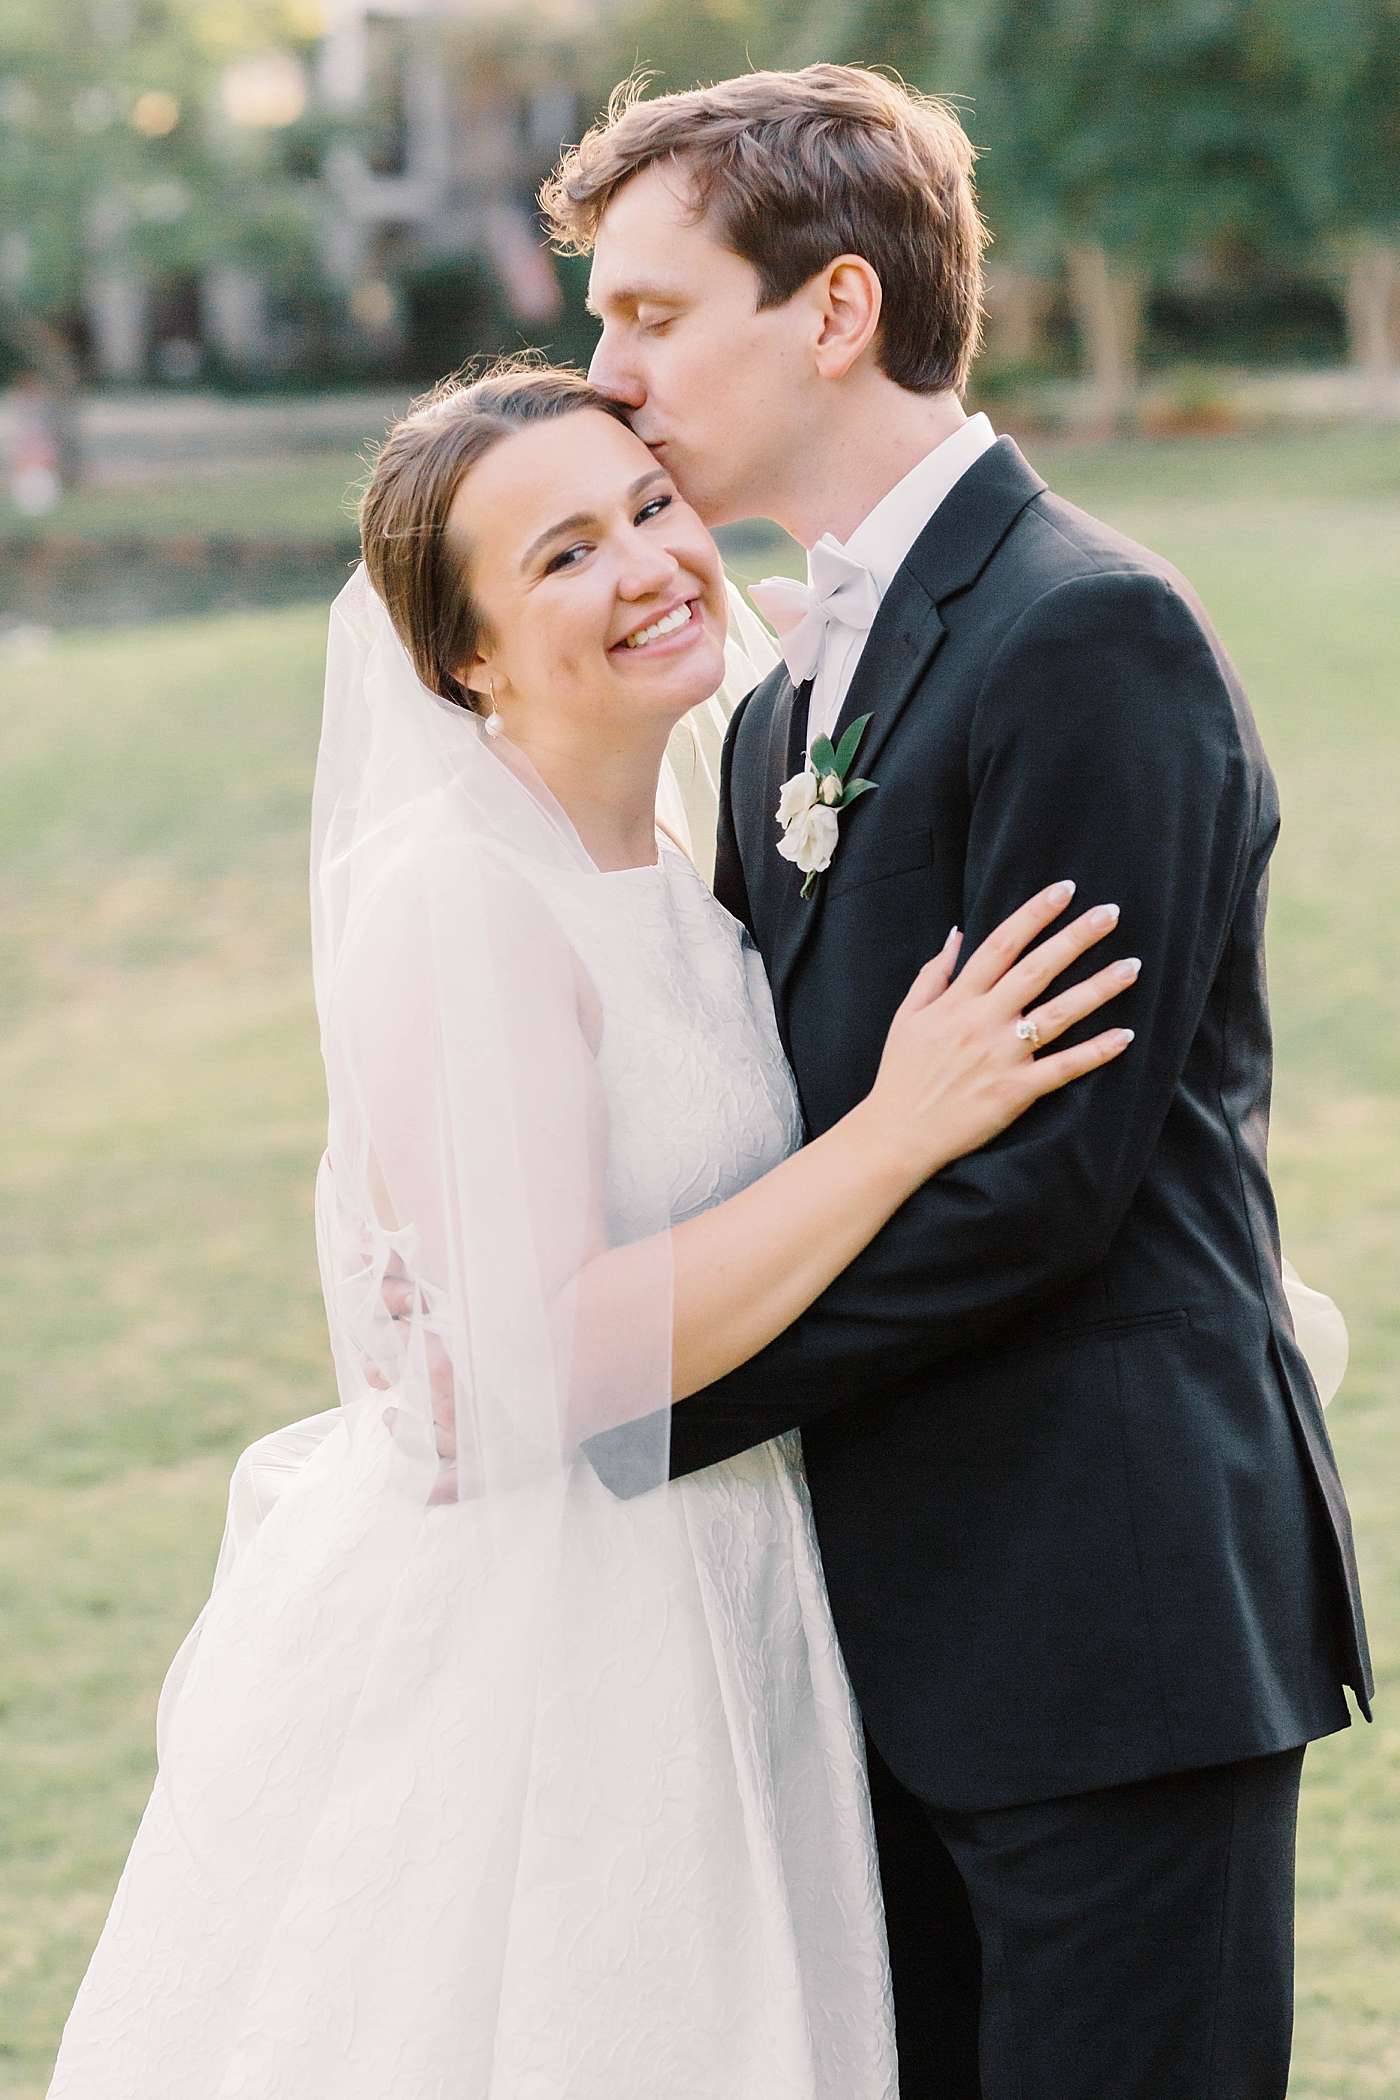 Groom kissing bride during their Intimate spring wedding | Carters Event Co